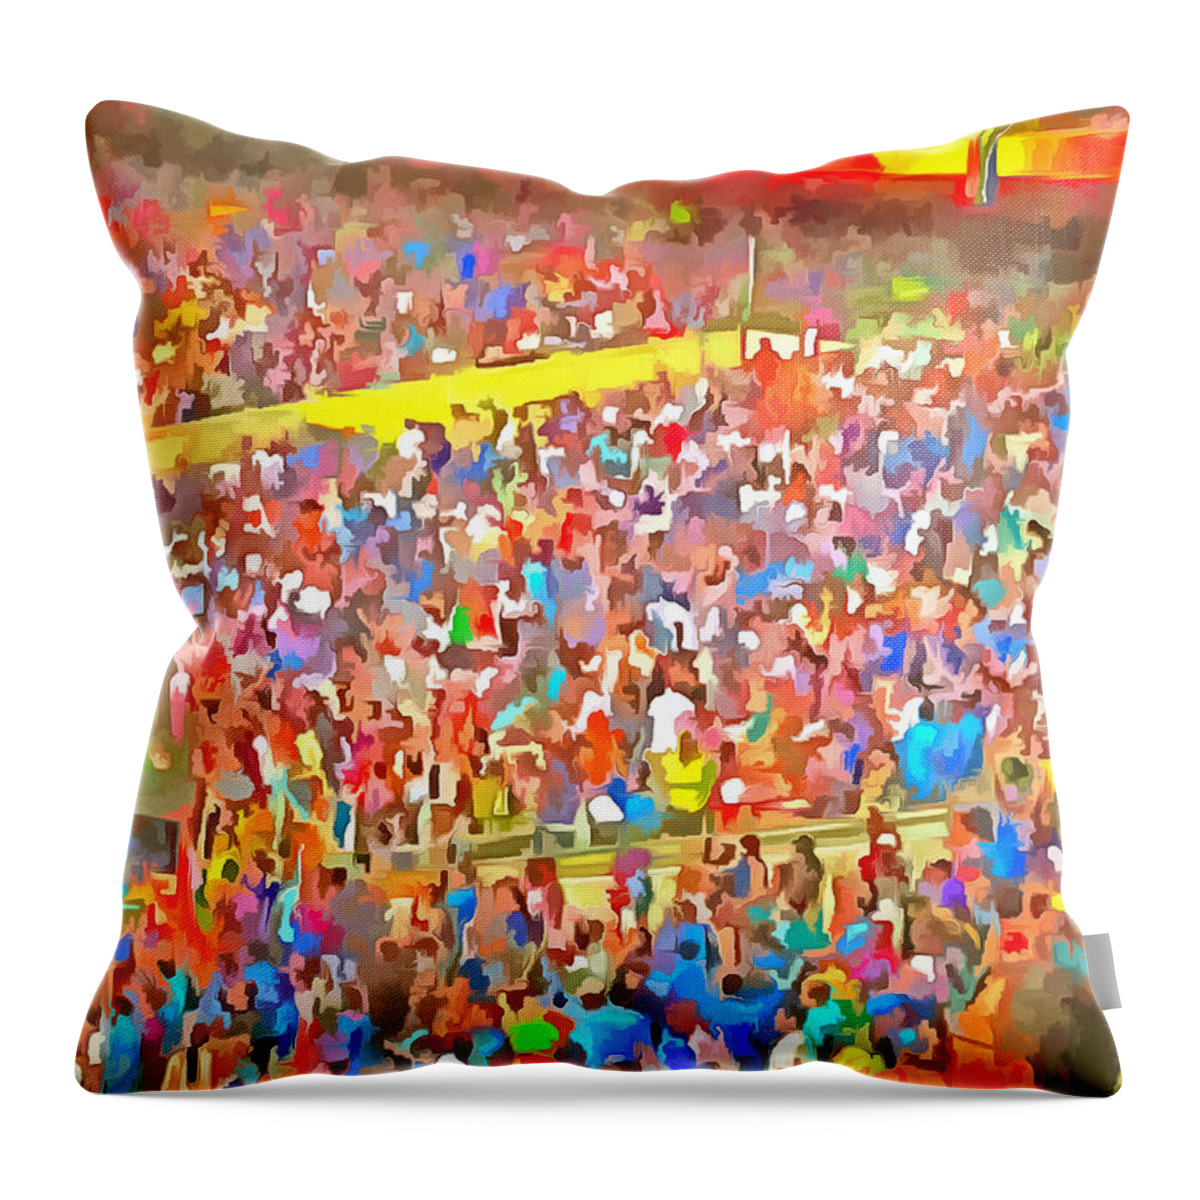 Spectators Throw Pillow featuring the photograph Spectators by Ashish Agarwal